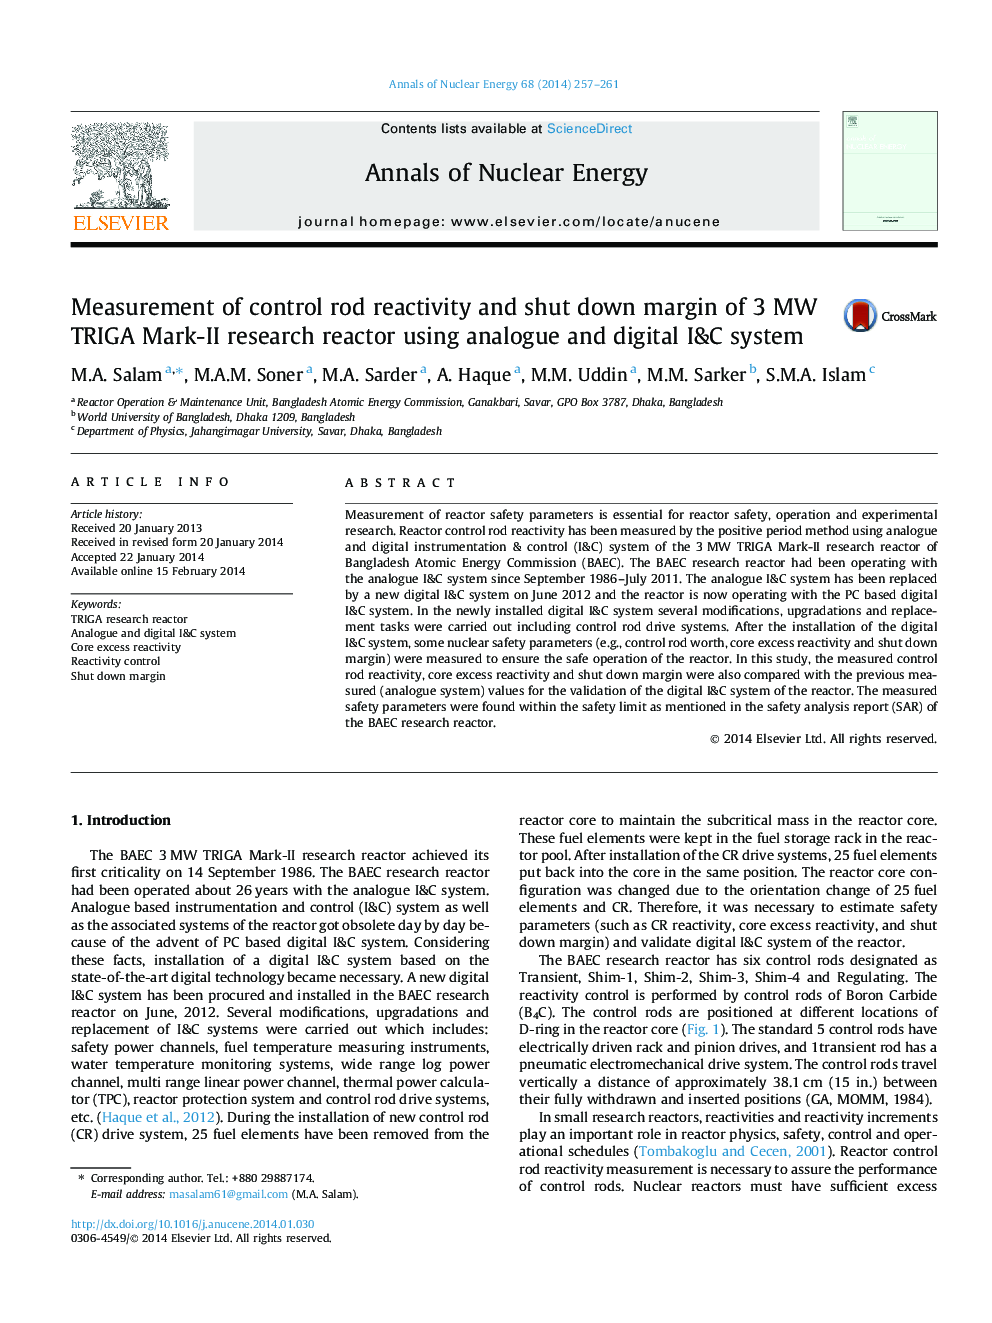 Measurement of control rod reactivity and shut down margin of 3 MW TRIGA Mark-II research reactor using analogue and digital I&C system